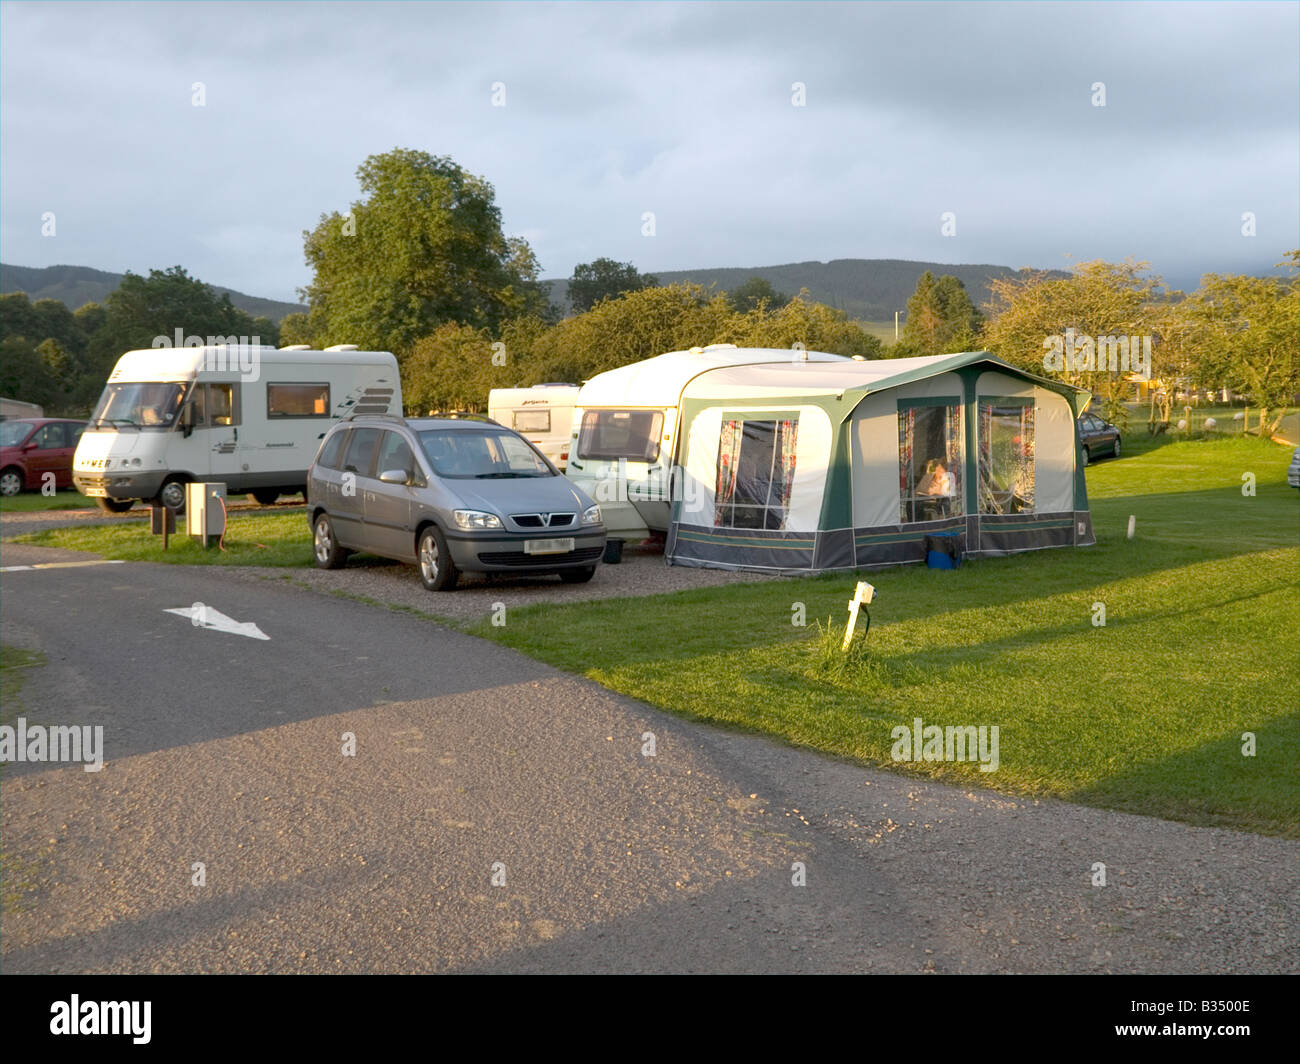 A caravan with an awning and a large motor caravan in the background on a holiday camp site in Scotland Stock Photo